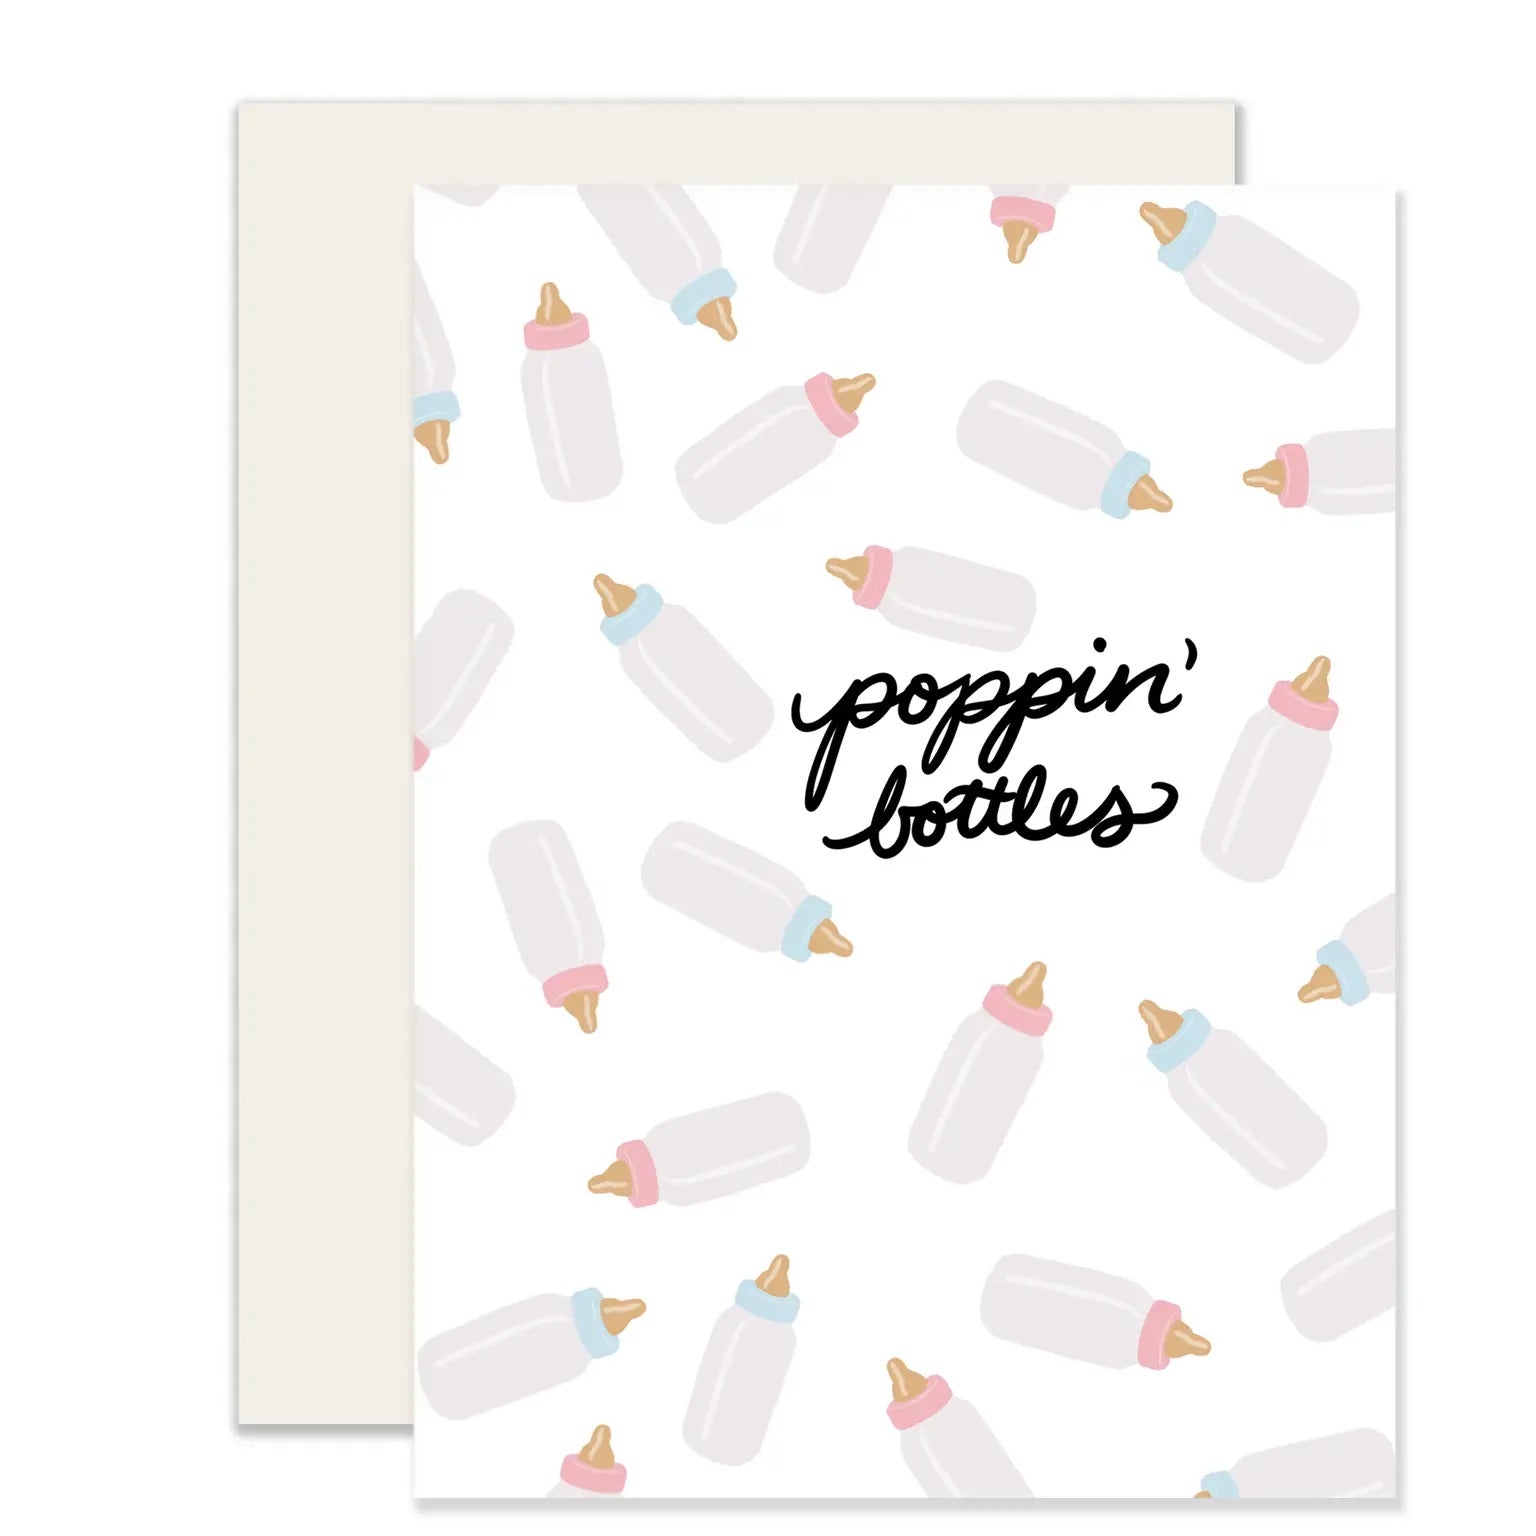 White card with baby bottles and black text "poppin' bottles"